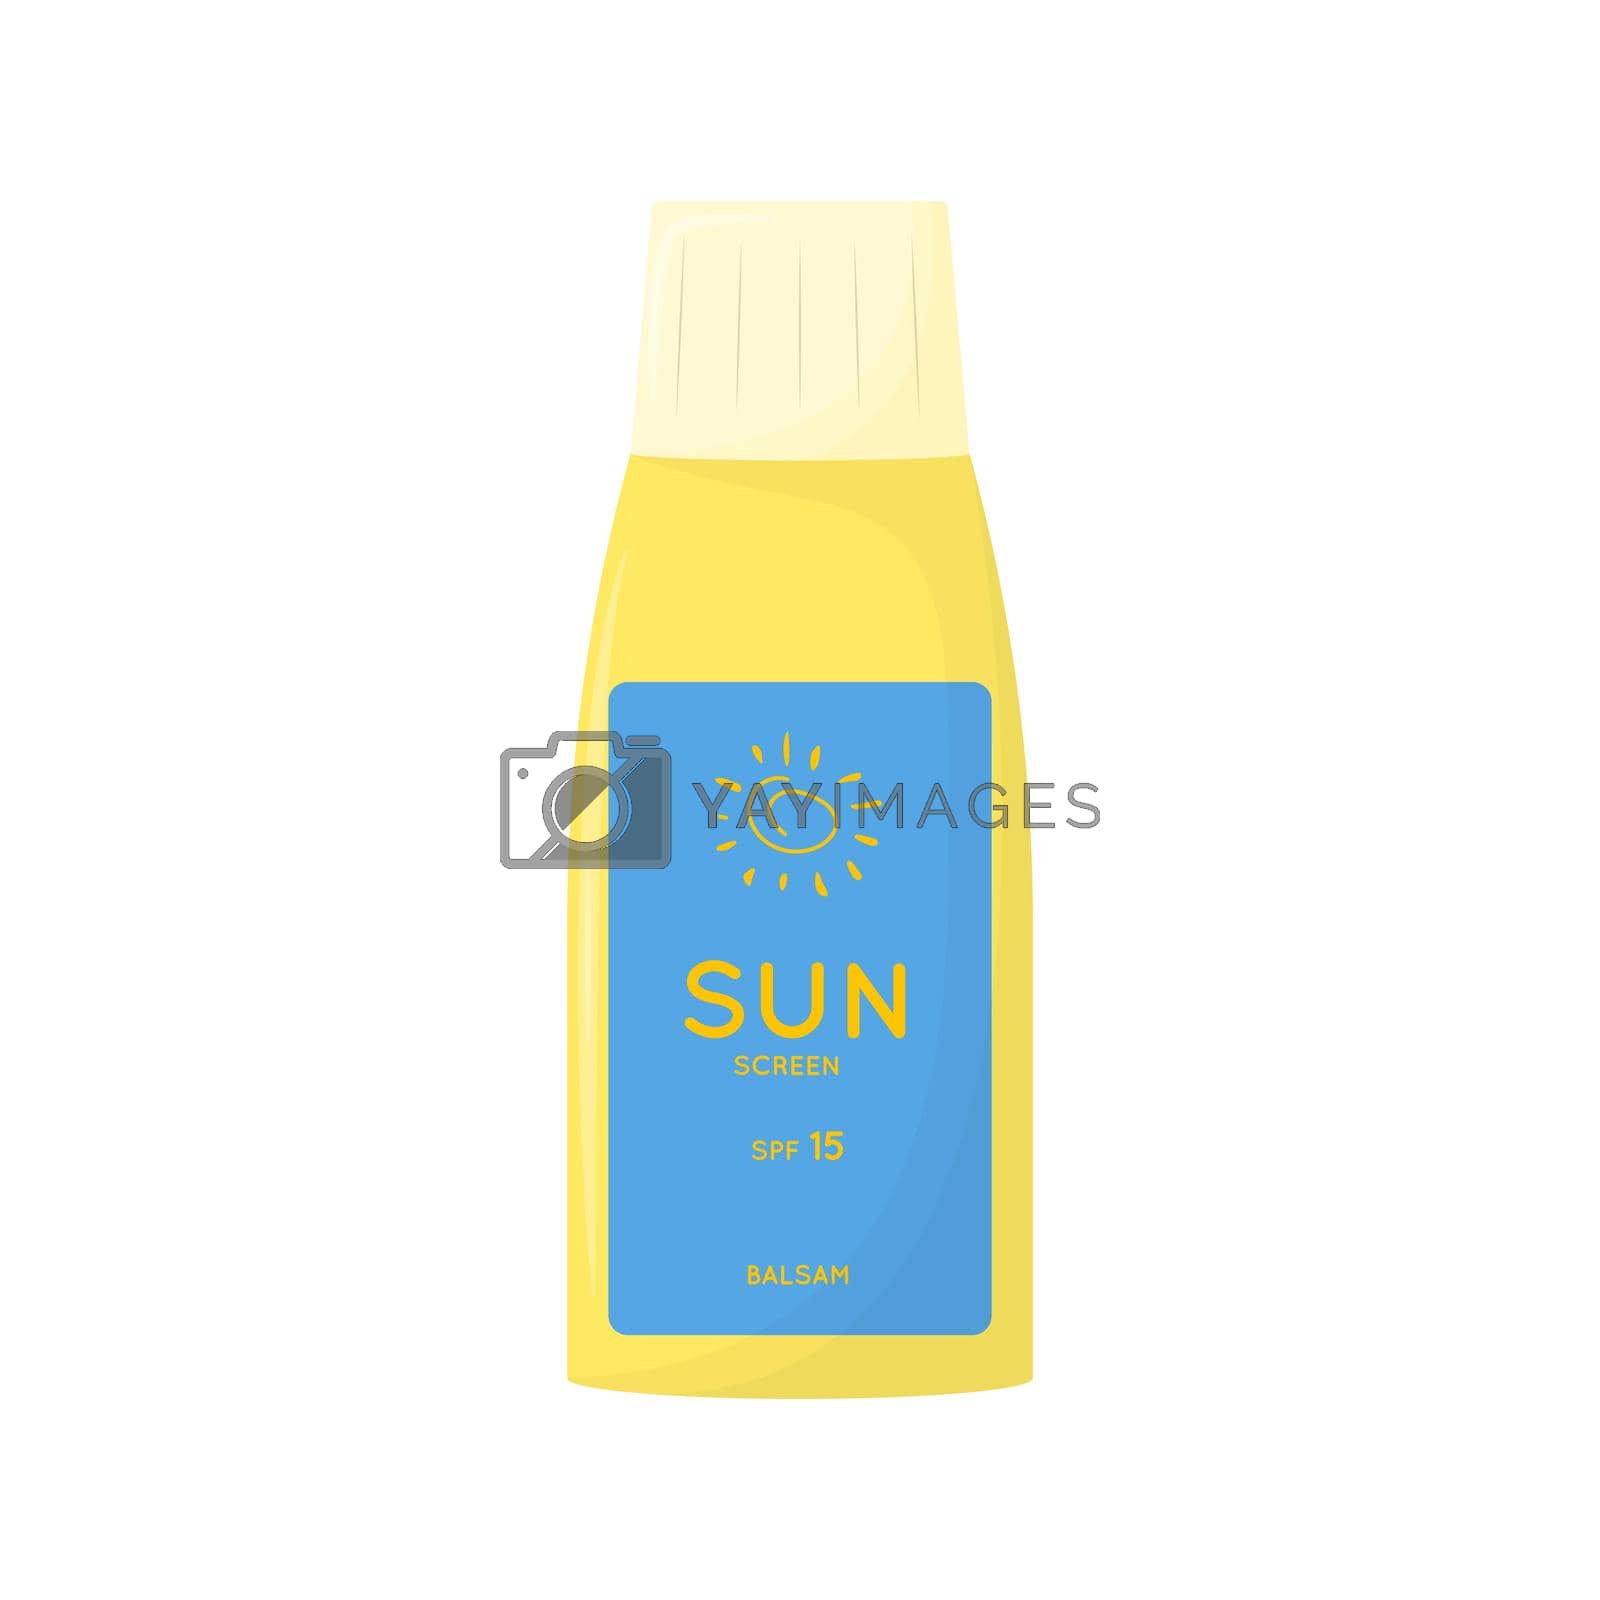 Royalty free image of Skin care product. Sun safety, UV protection cream. Tube of sunscreen product with SPF. Summer cosmetic. Flat vector illustration isolated on white background. by anna_orlova